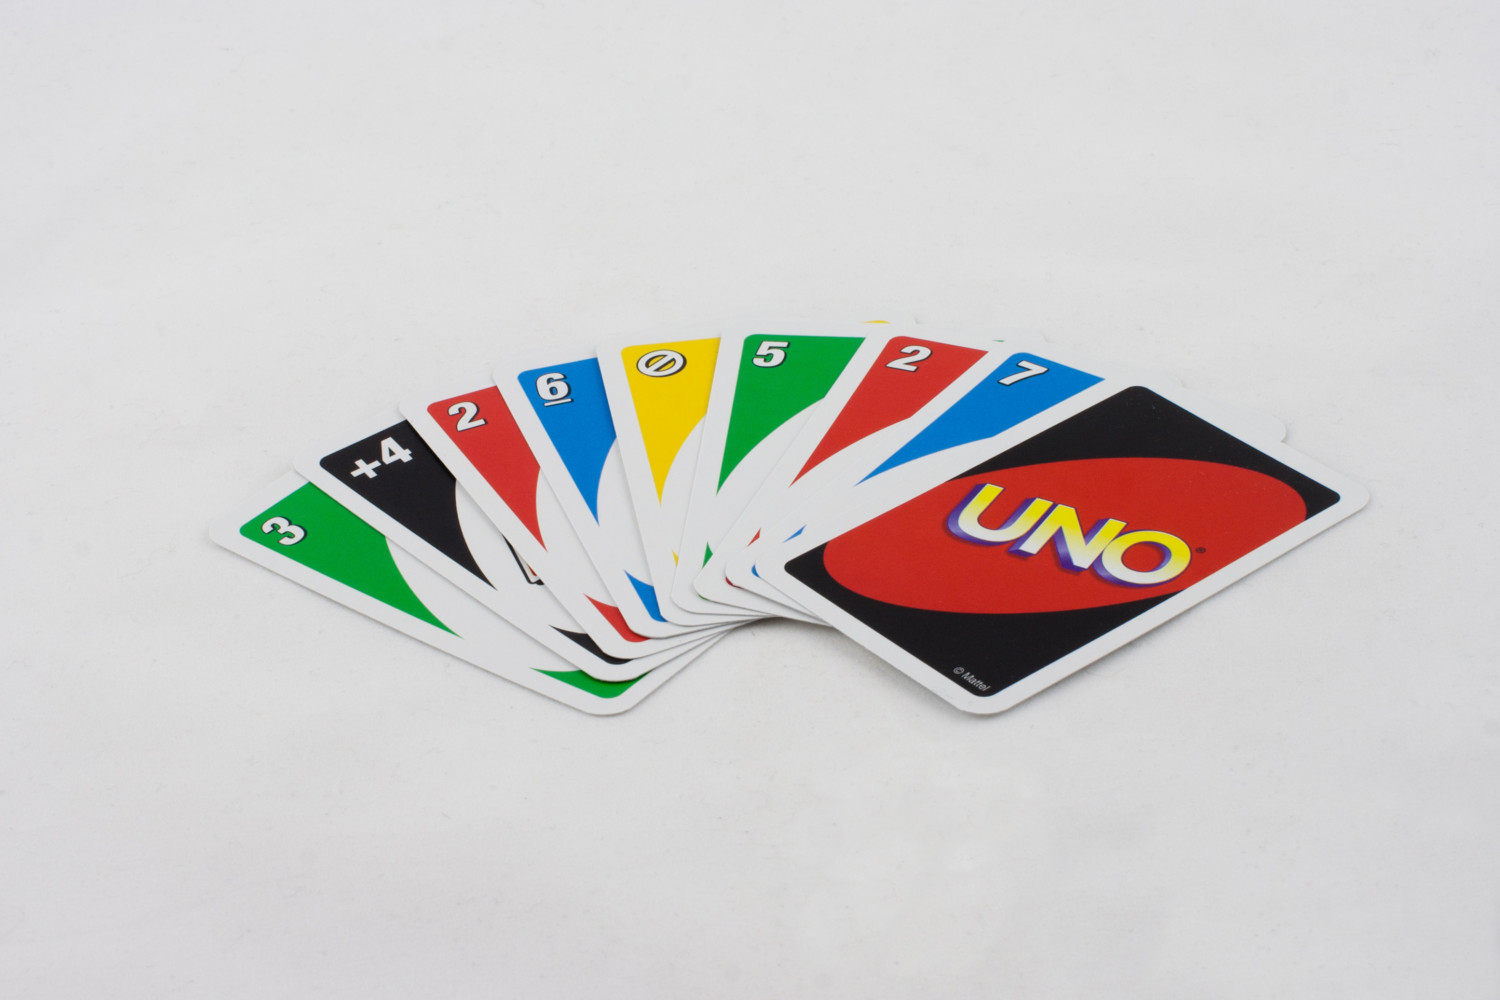 Image Of How To Play Uno Correctly Simplemost.